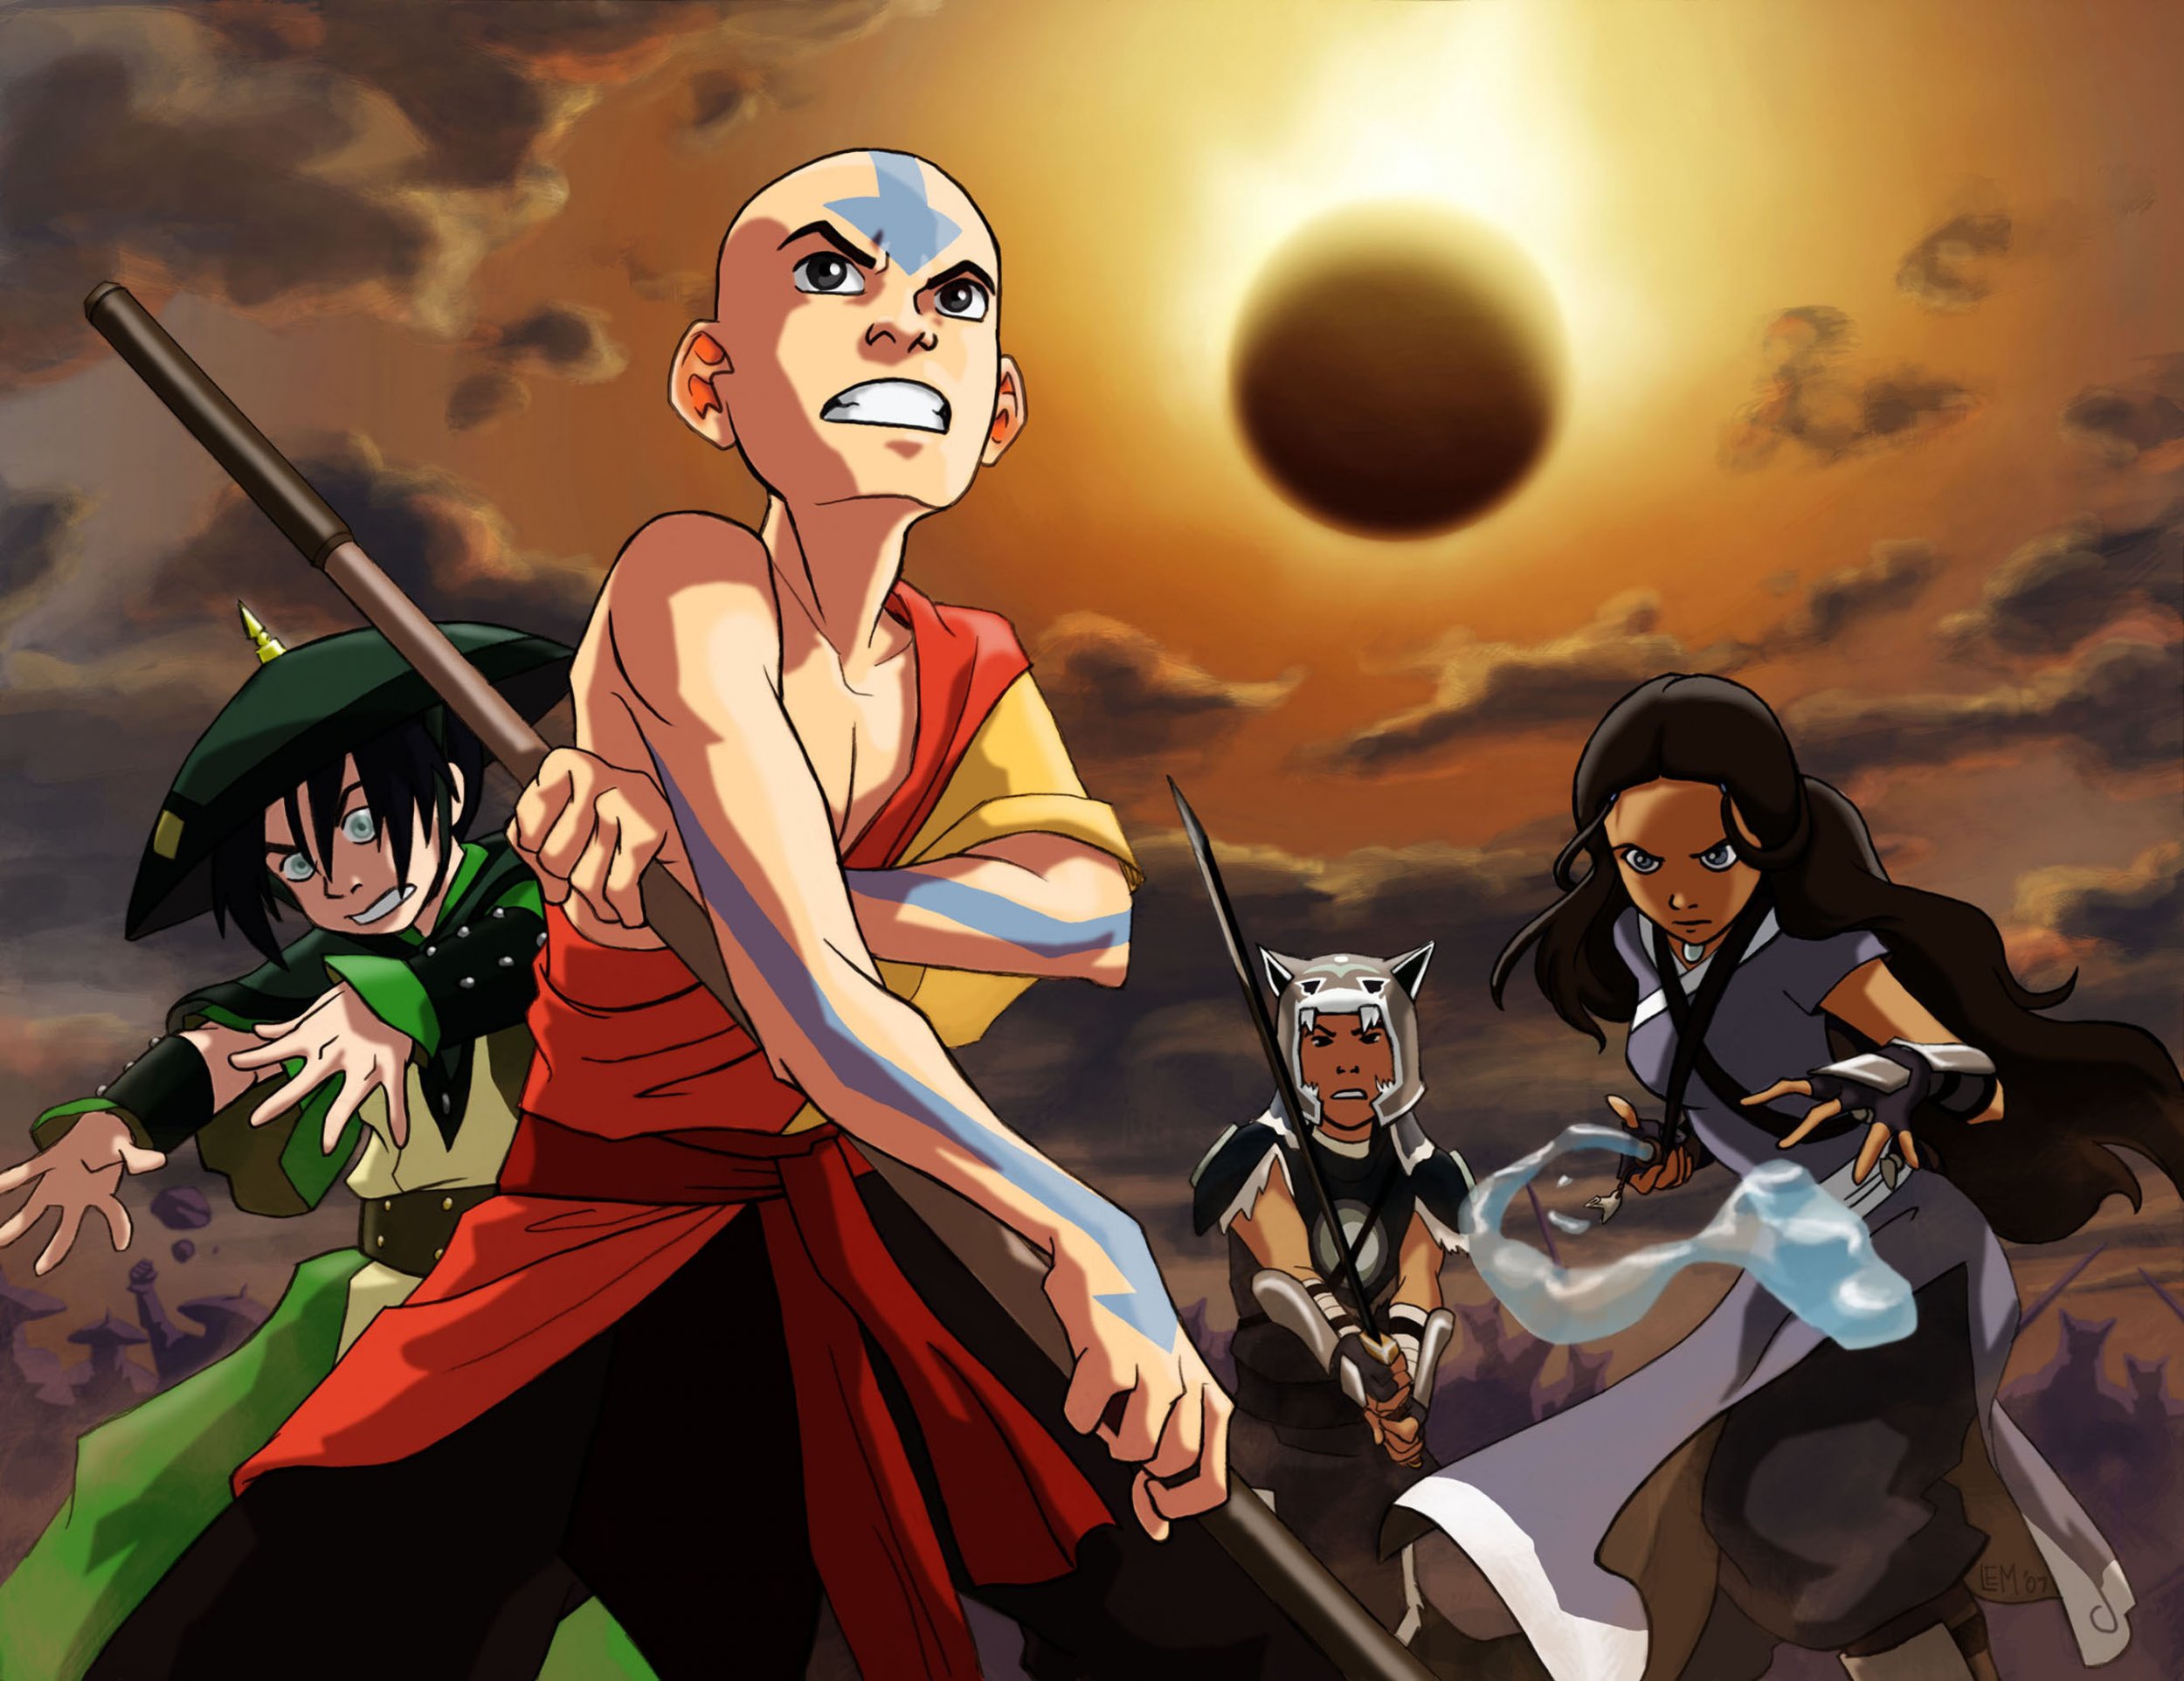 Watch Avatar The Last Airbender Season 1 Episode 1 The Boy in the Iceberg  The Avatar Returns Part 1  Full show on Paramount Plus